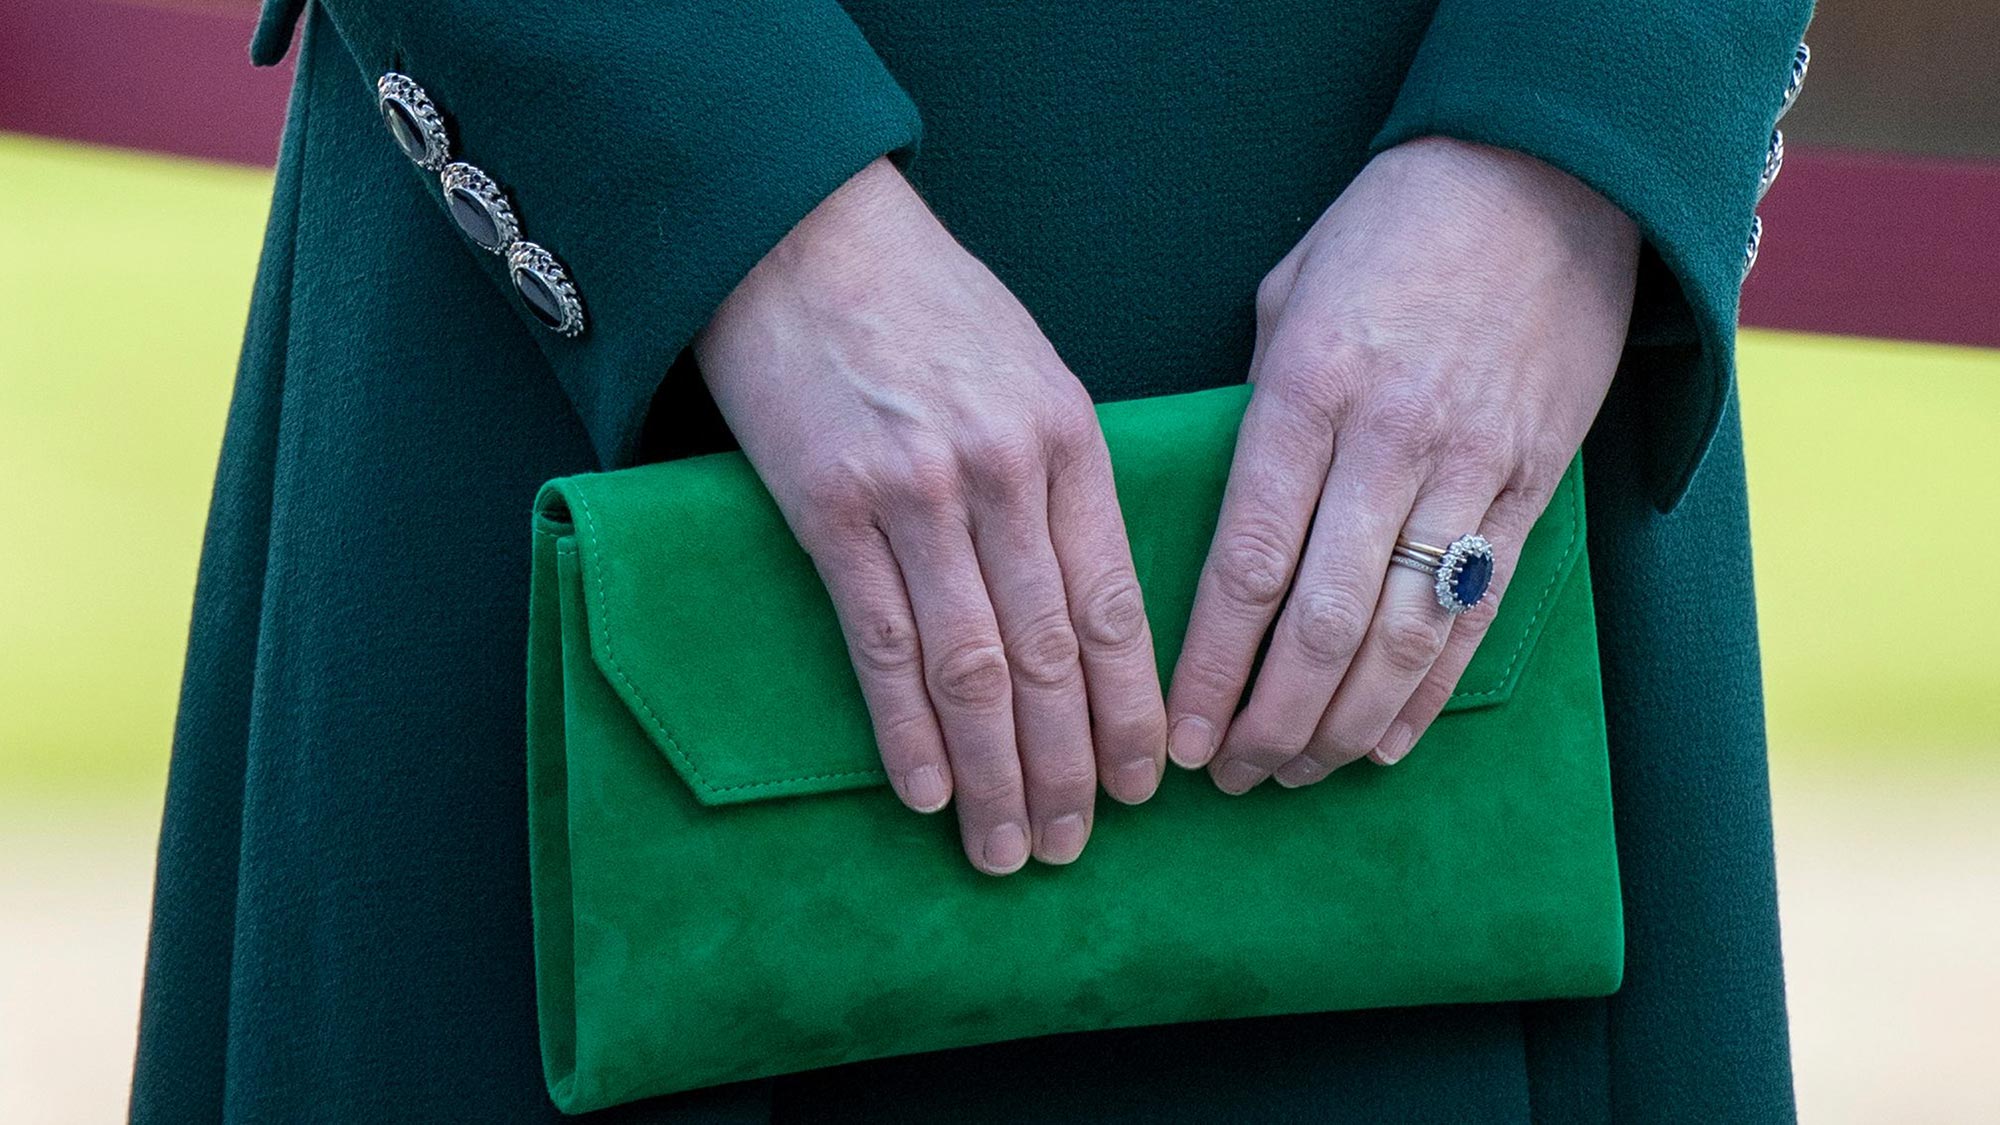 This  Purse Looks Similar to One Kate Middleton Carries